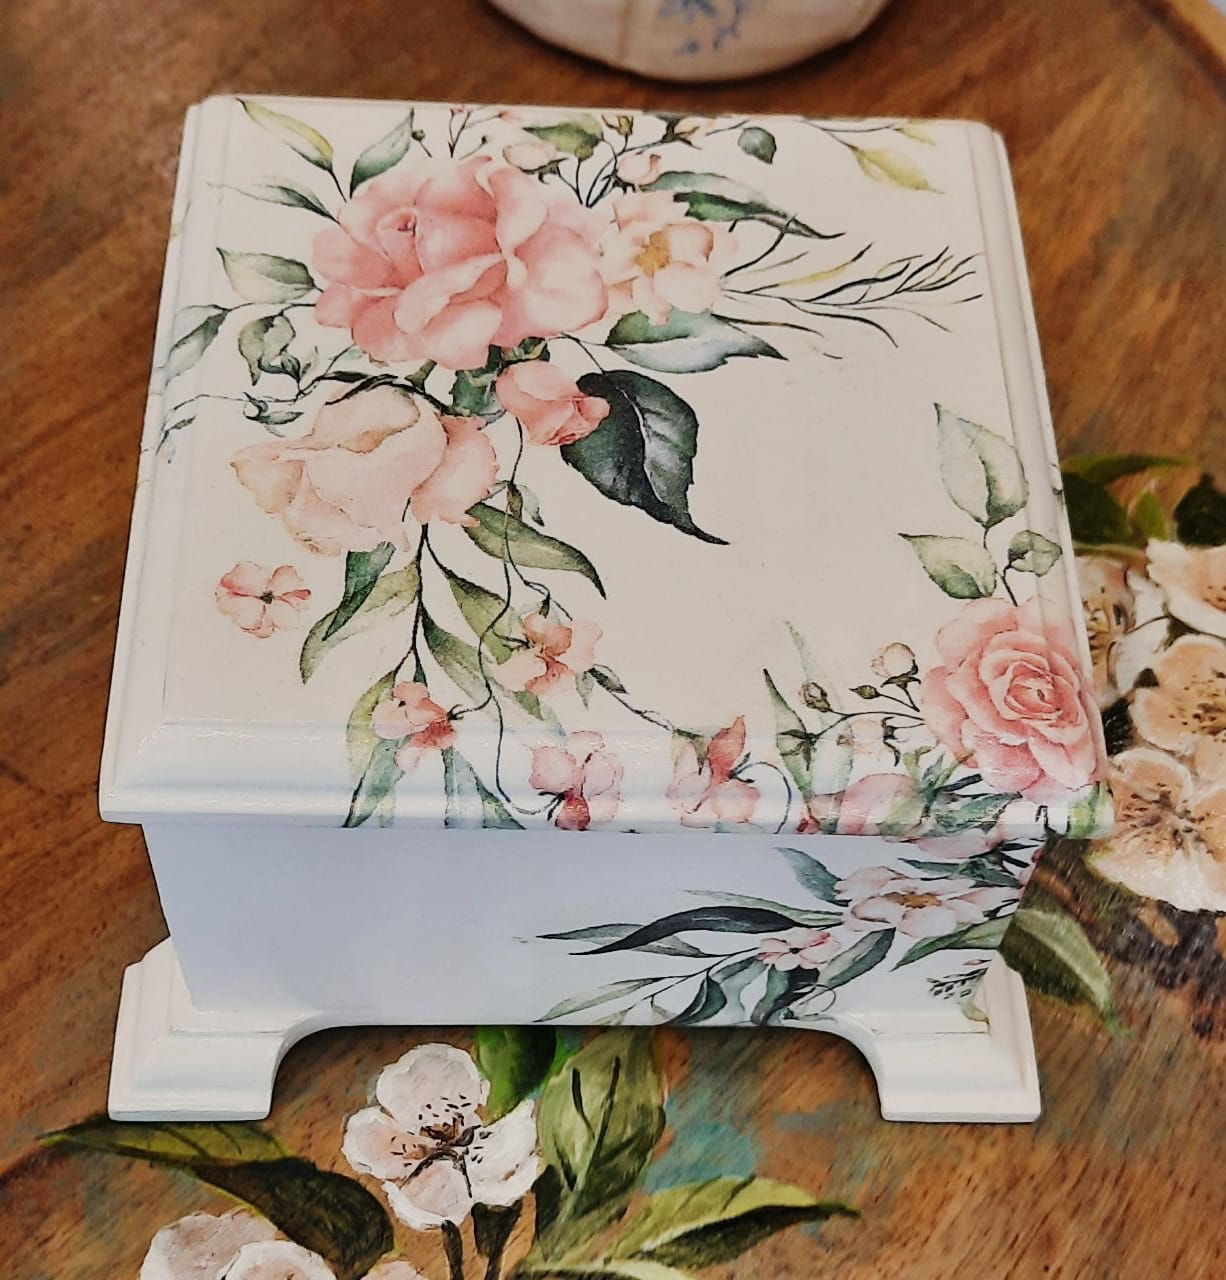 Wooden Handmade & Hand Painted Jewelry Square Boxes, Home Decor